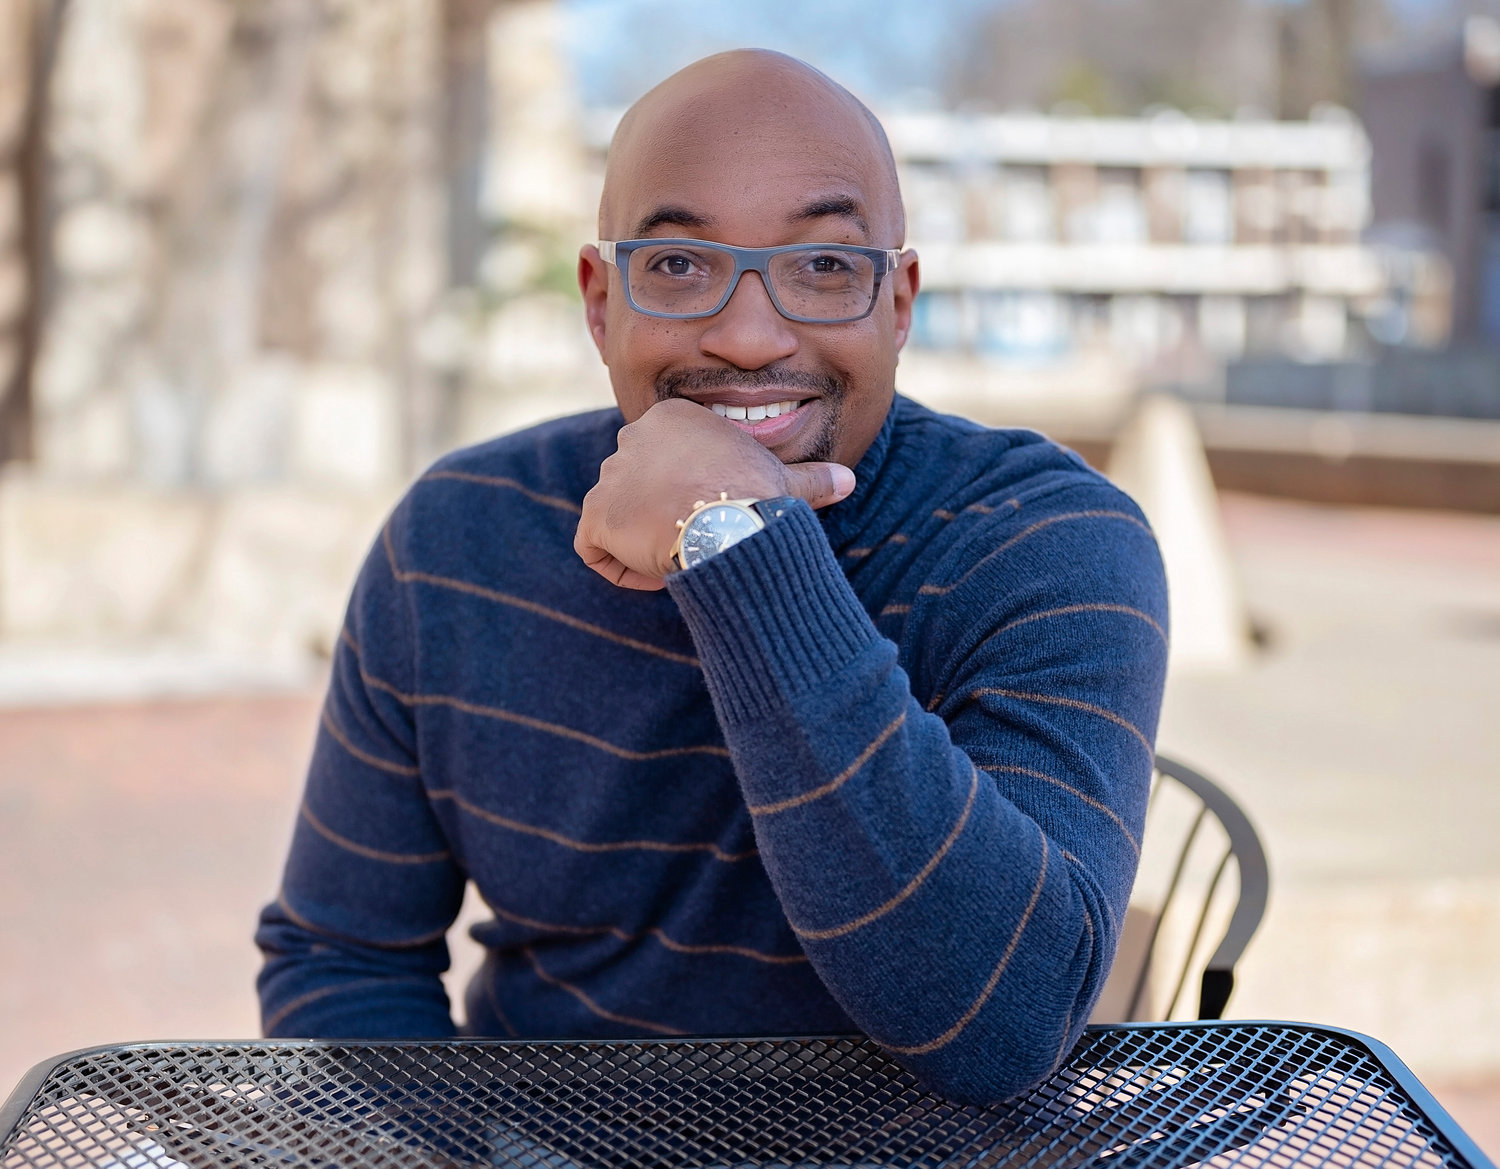 Author and poet Kwame Alexander’s latest book, “An American Story,” is meant to be a primer for parents, children and teachers on how the history of slavery is taught. He will discuss the book and its messages at Everett High School on Monday (April 17).